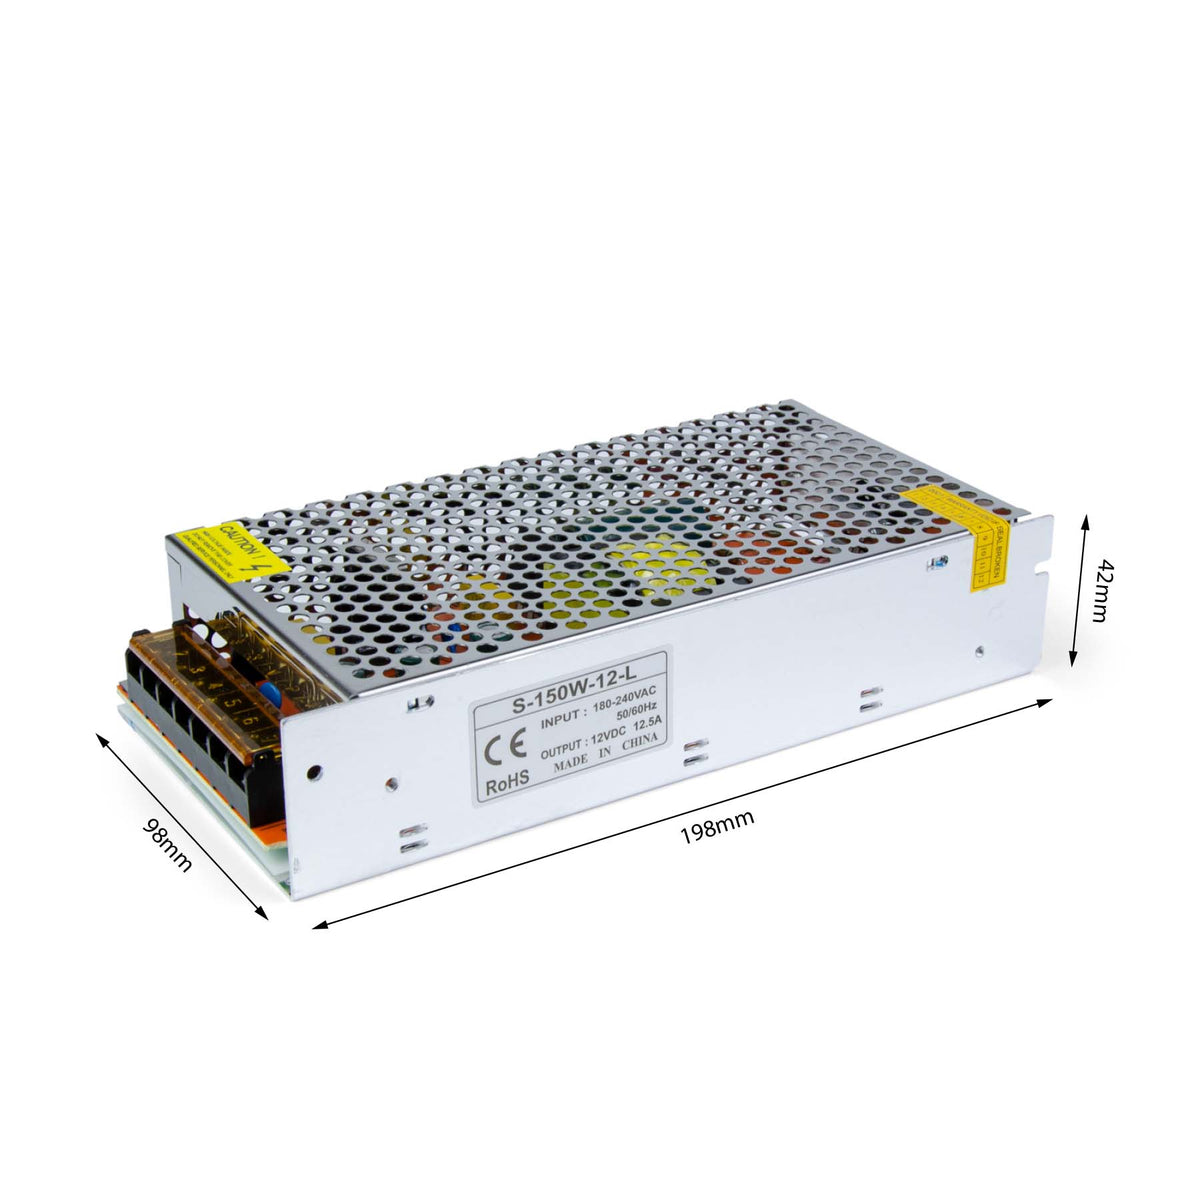 G.W.S. LED LED Drivers/LED Power Supplies IP20 (Non-Waterproof) / 12V / 150W 12V 12.5A 150W LED Driver